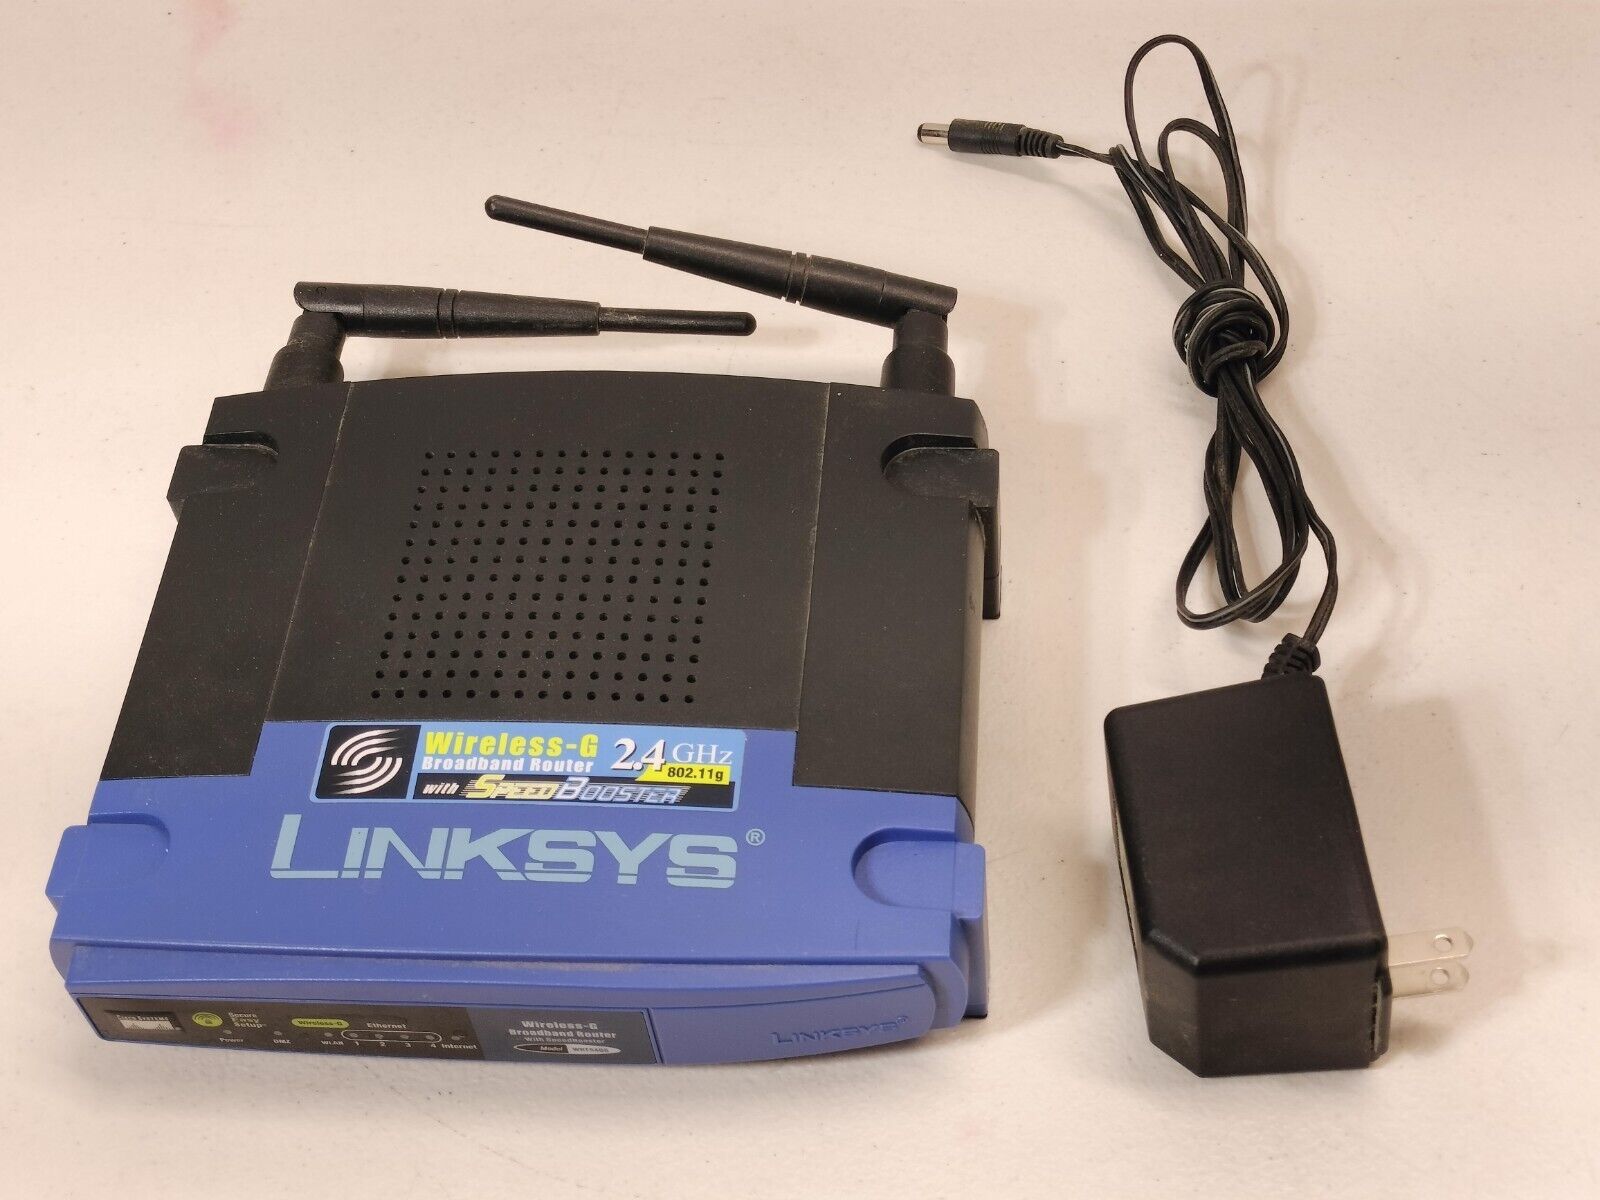 Linksys WRT54GS v7 54 Mbps 4-Port 10/100 Wireless G Router (CGN9) WIFI